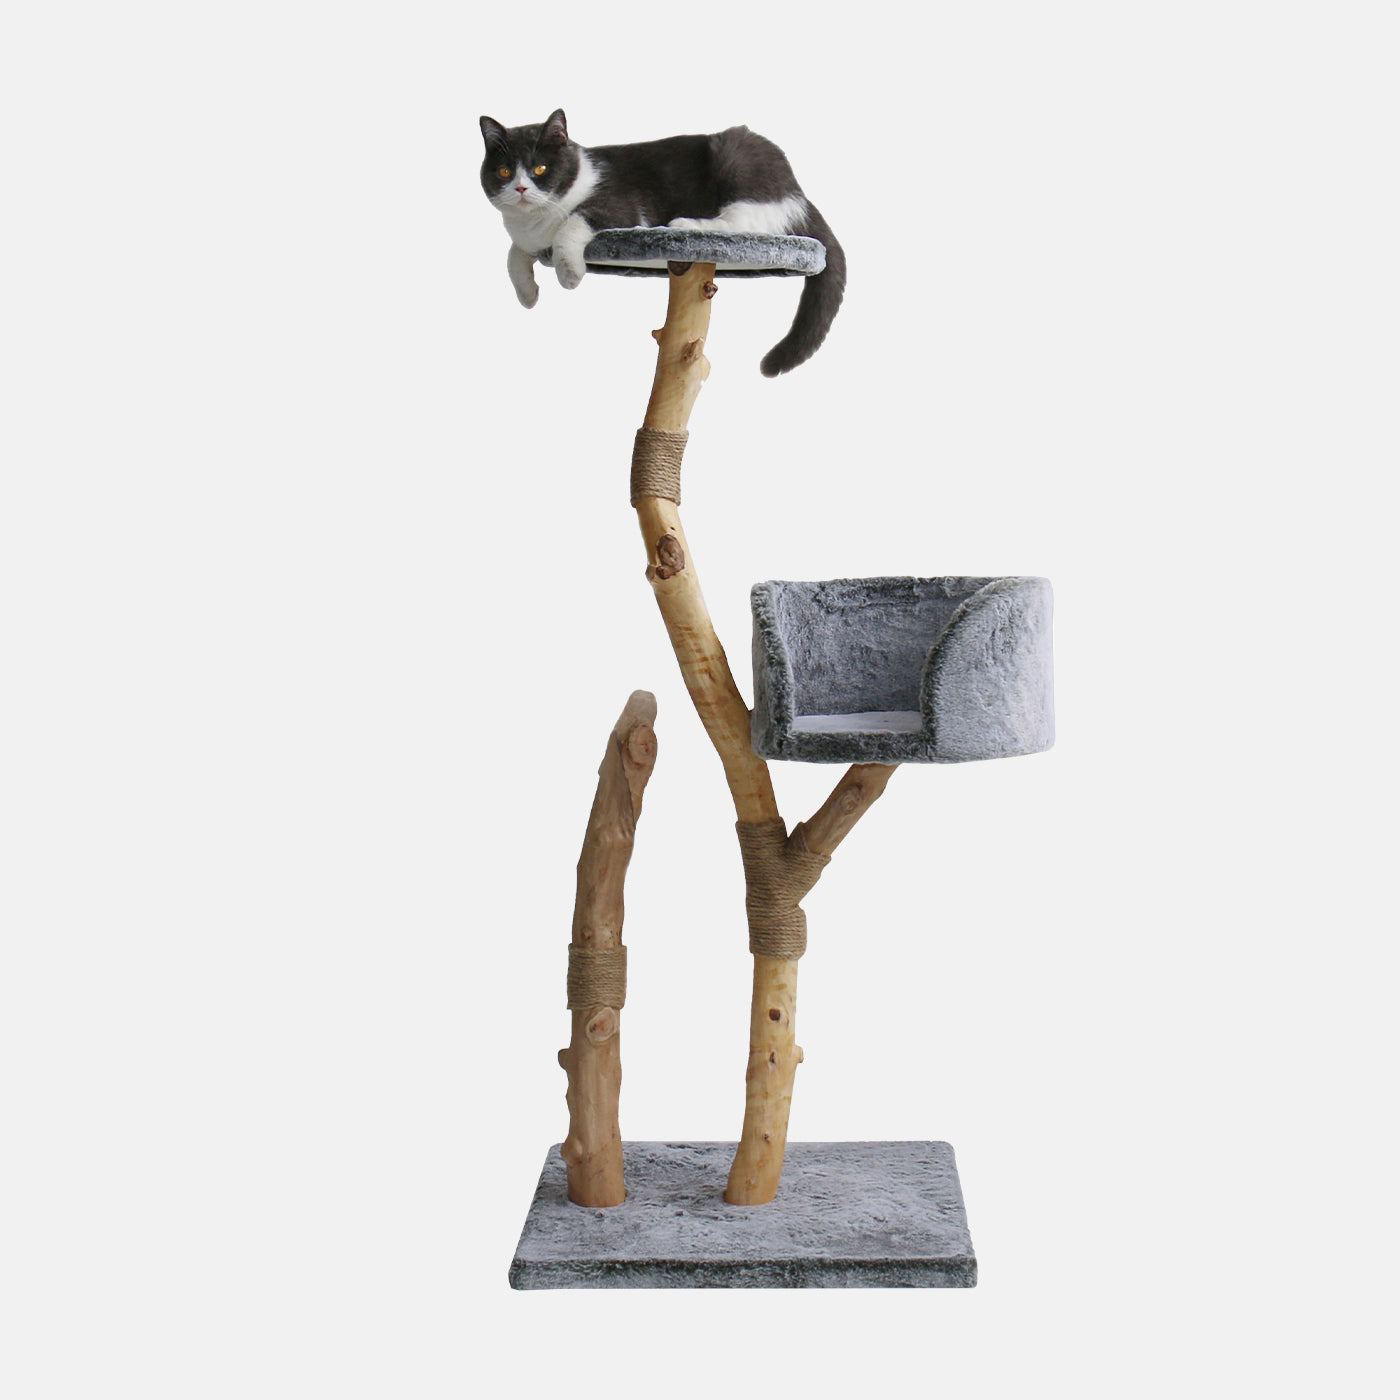 Discover our Luxury Back to Nature The Trio Cat Scratch Post. Features High Sided Cosy Platforms For Kittens and Cats To Rest, Made From Thick Natural Wood Perfect For Scratching! Available Now at Lords & Labradors 